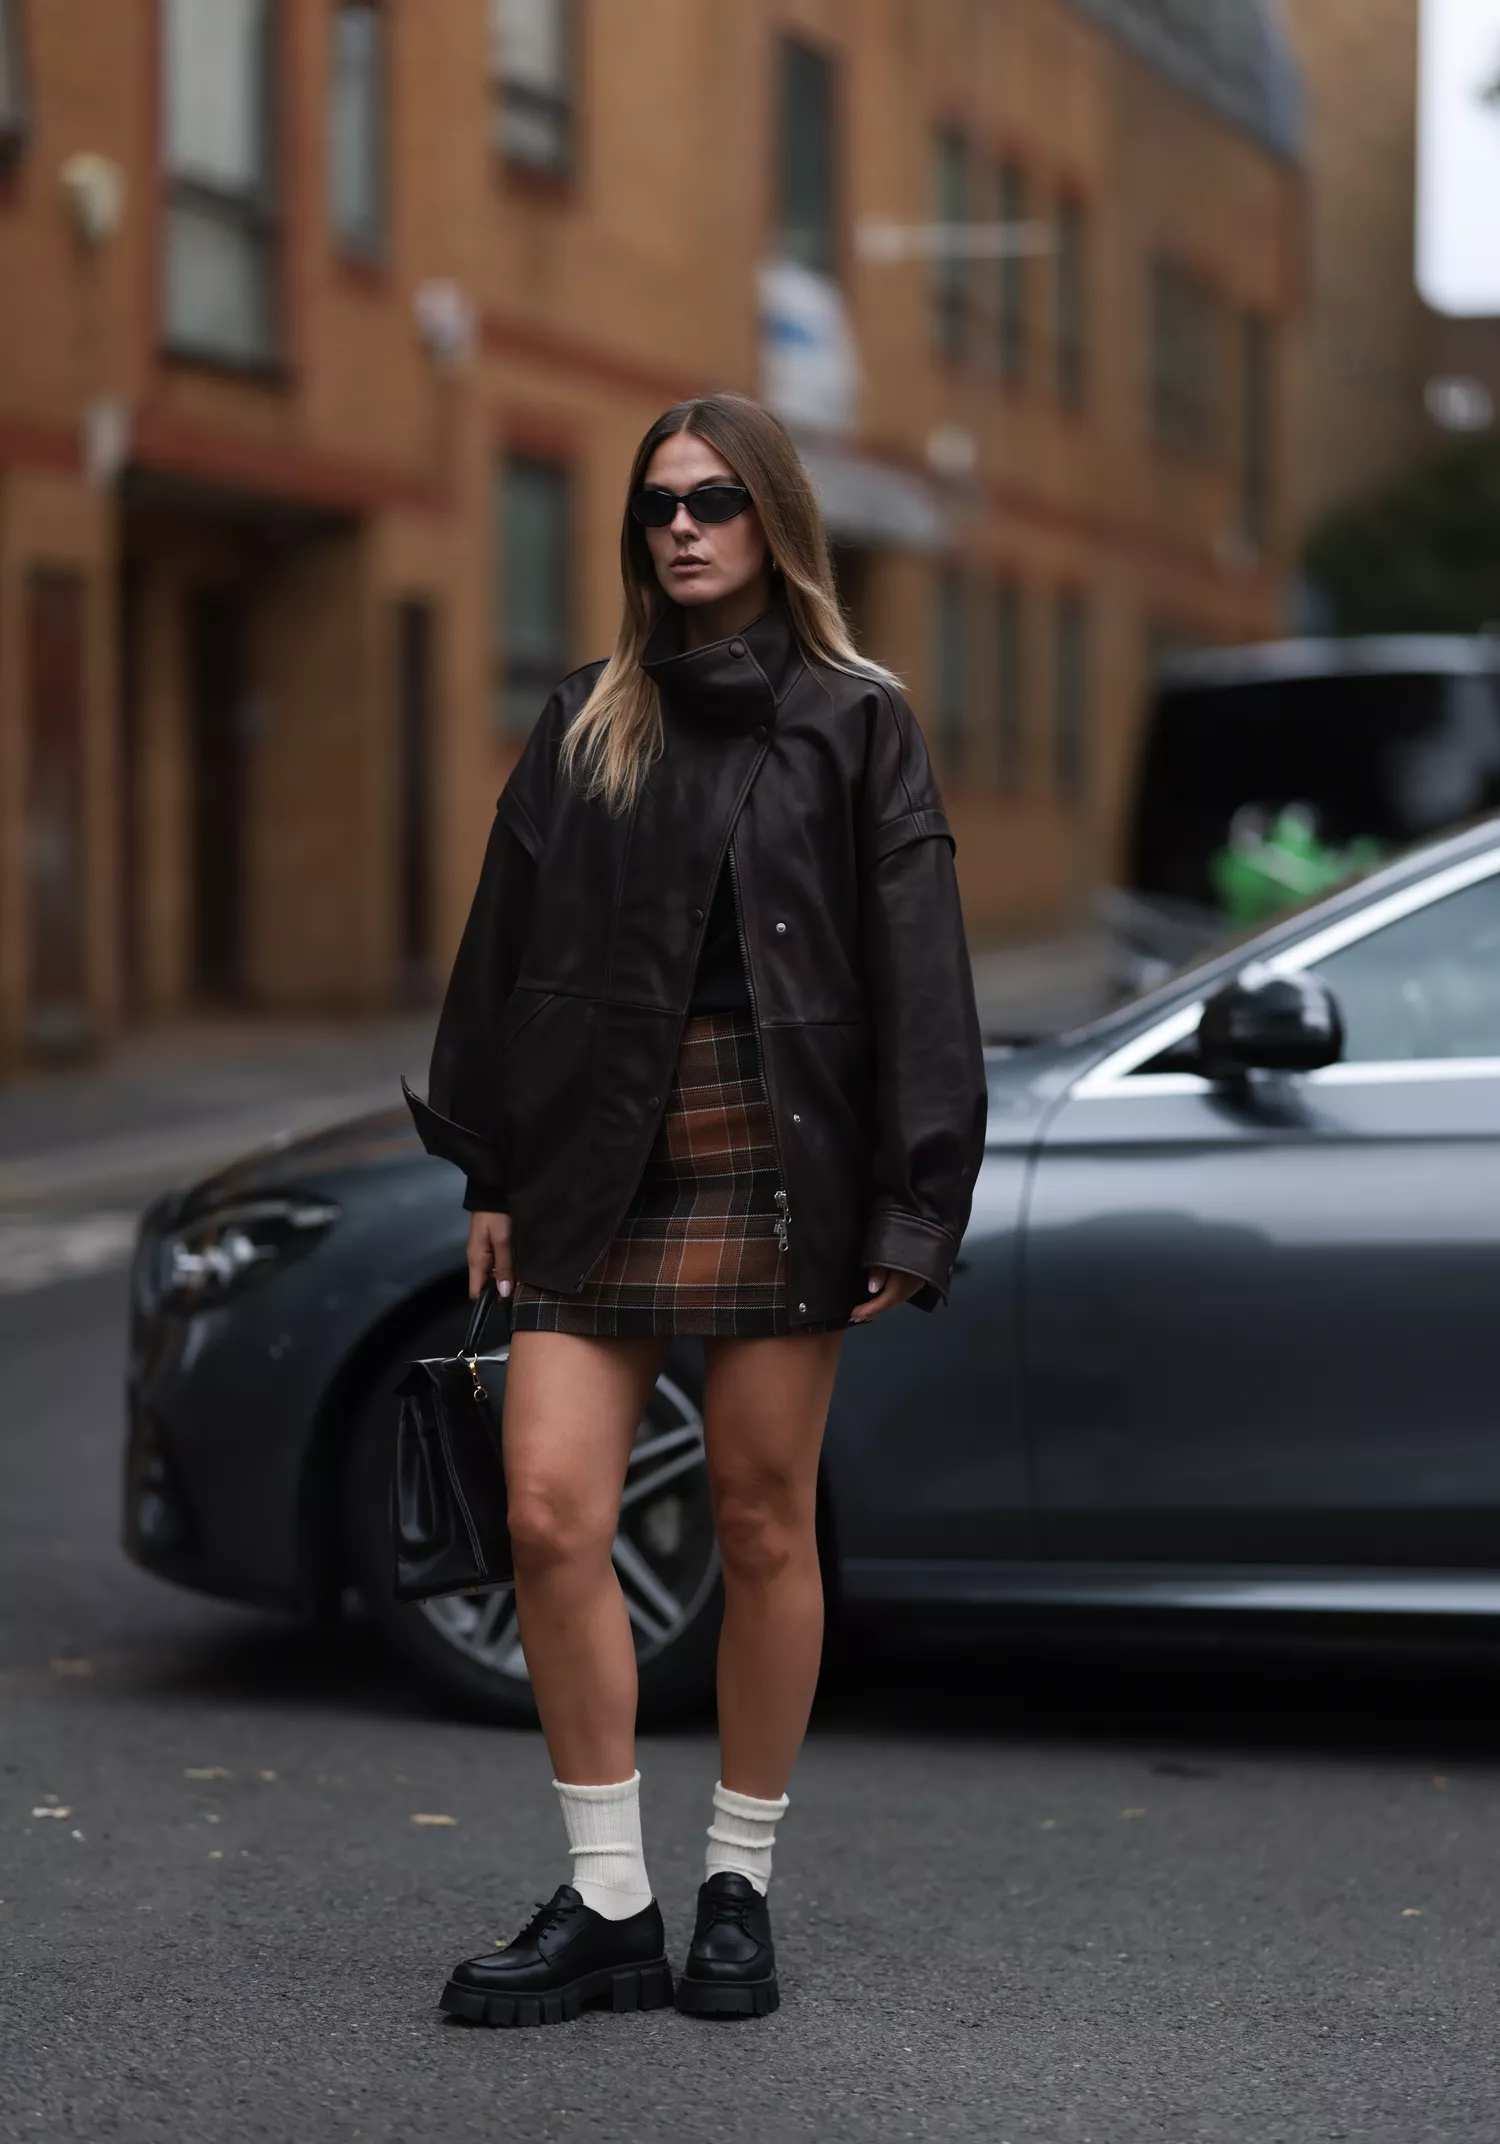 Alessa Winter is seen wearing black sunglasses from Oakley, a brown leather jacket from Gant, underneath a black top, a checked mini skirt in brown shades from Gant, a vintage Kelly bag from HermÃƒÂ¨s in black leather, white socks and black leather loafers from Marco Polo